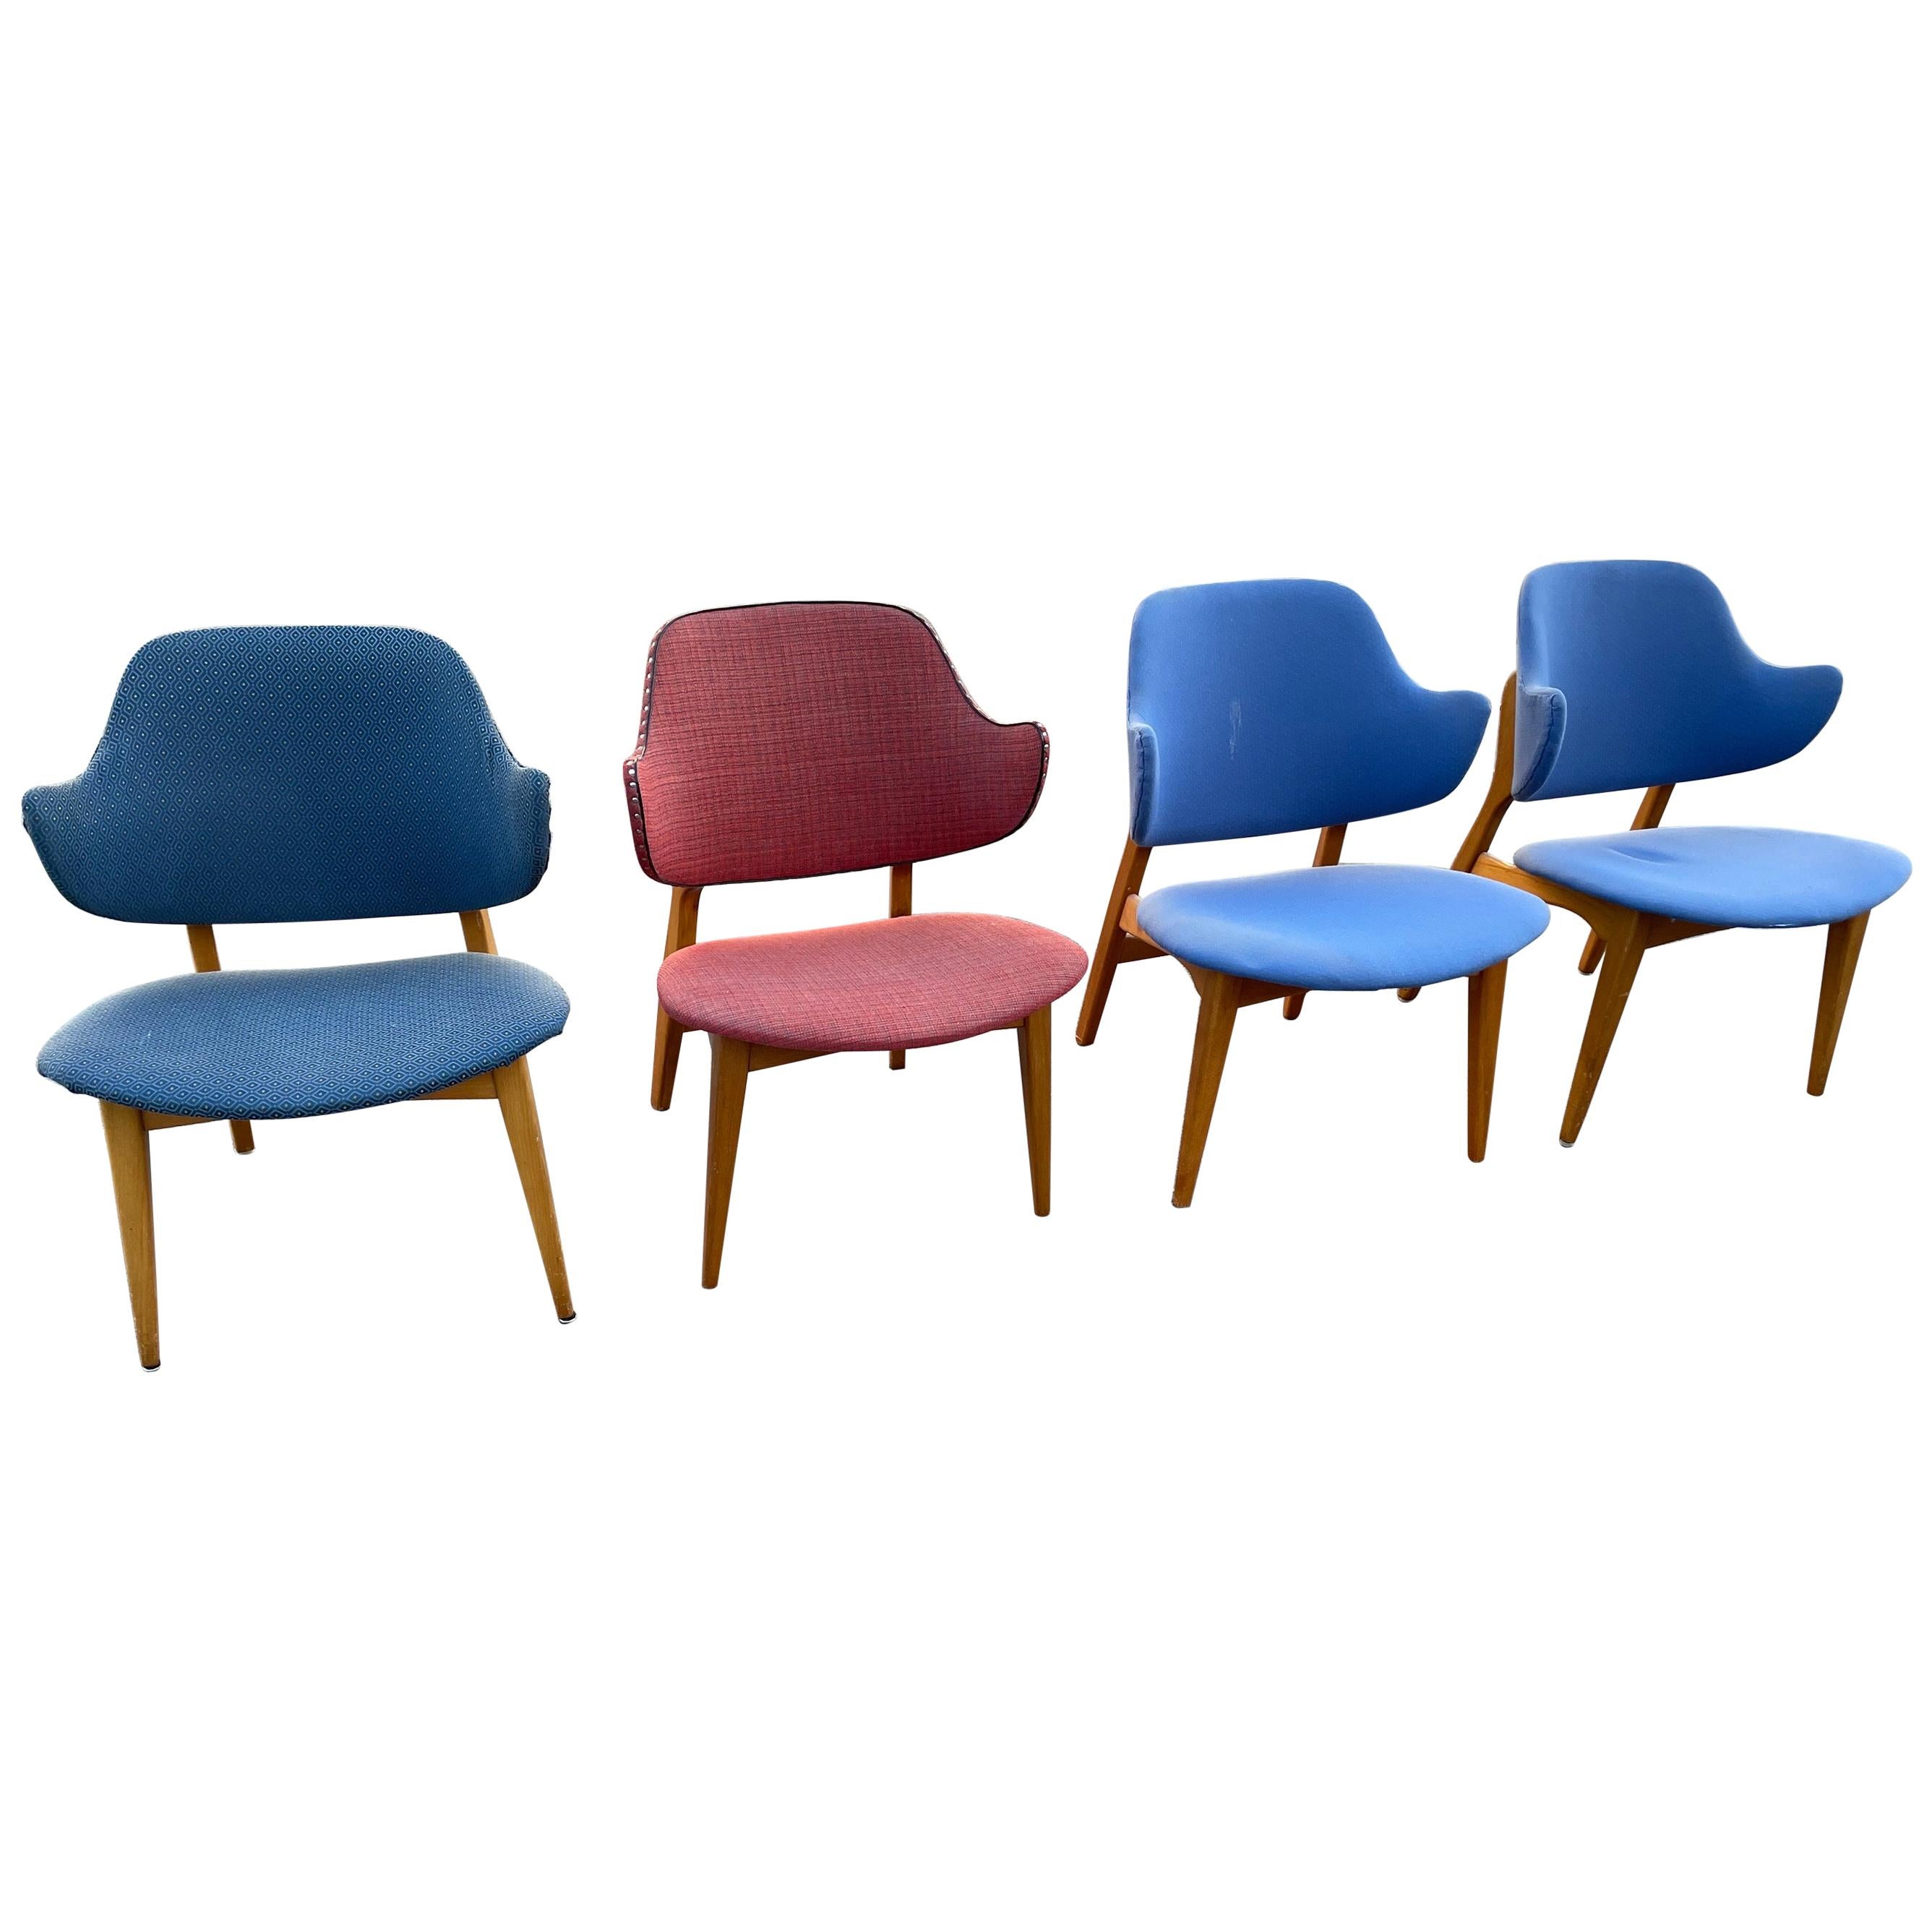 Winnie Chairs by Ikea, 1950s For Sale